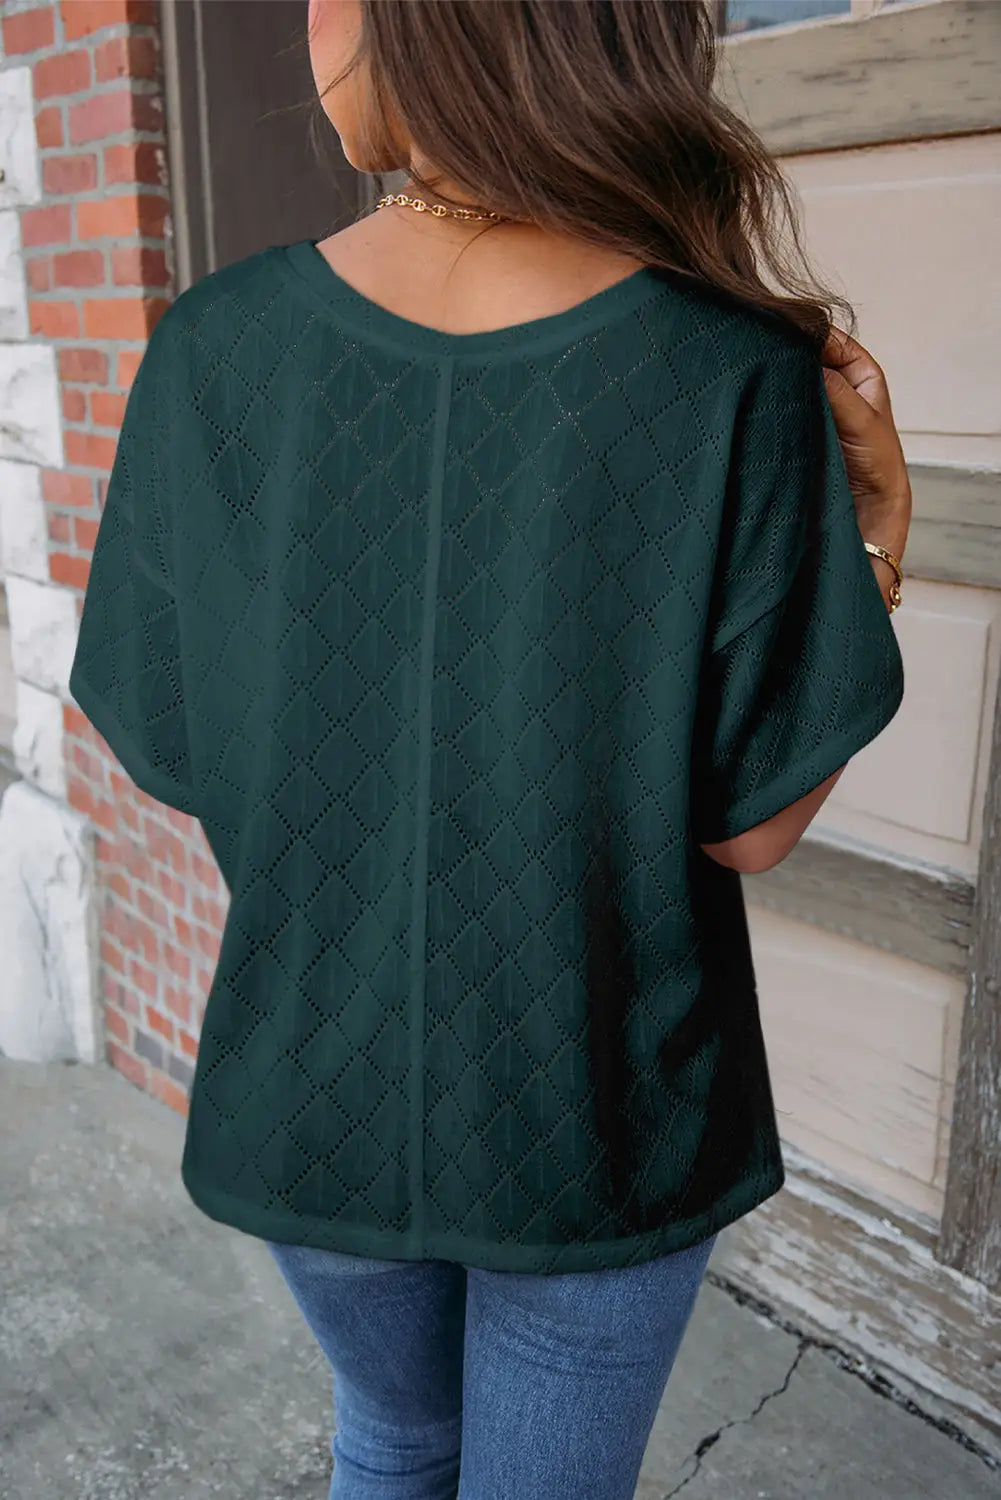 Green v neck knitted flowy blouse - blouses & shirts